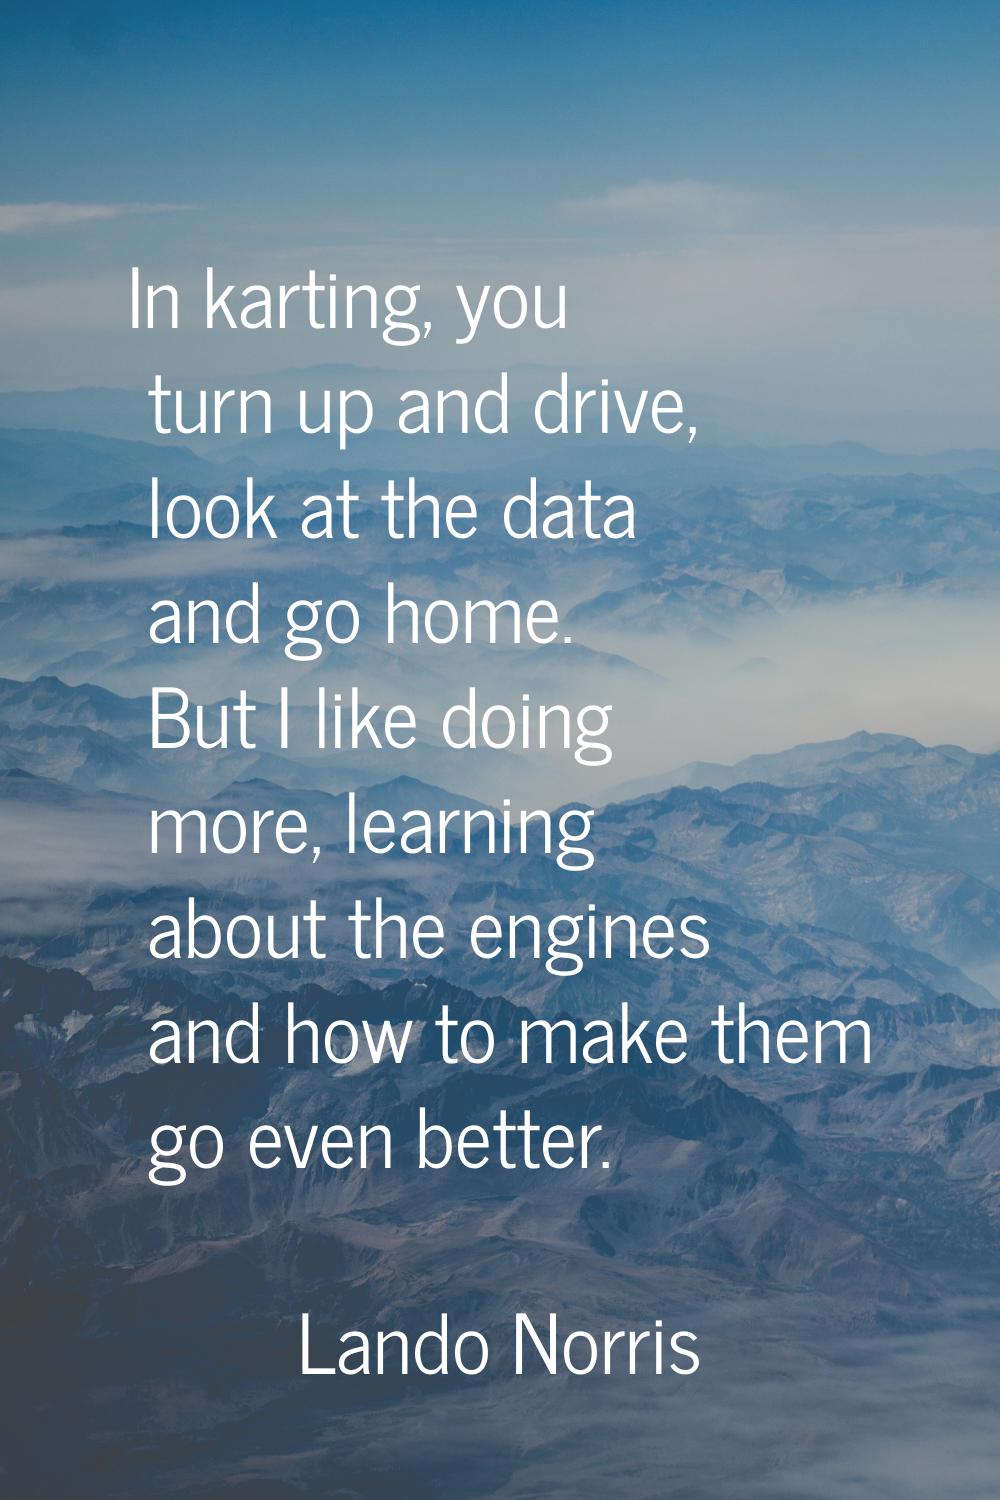 In karting, you turn up and drive, look at the data and go home. But I like doing more, learning ab